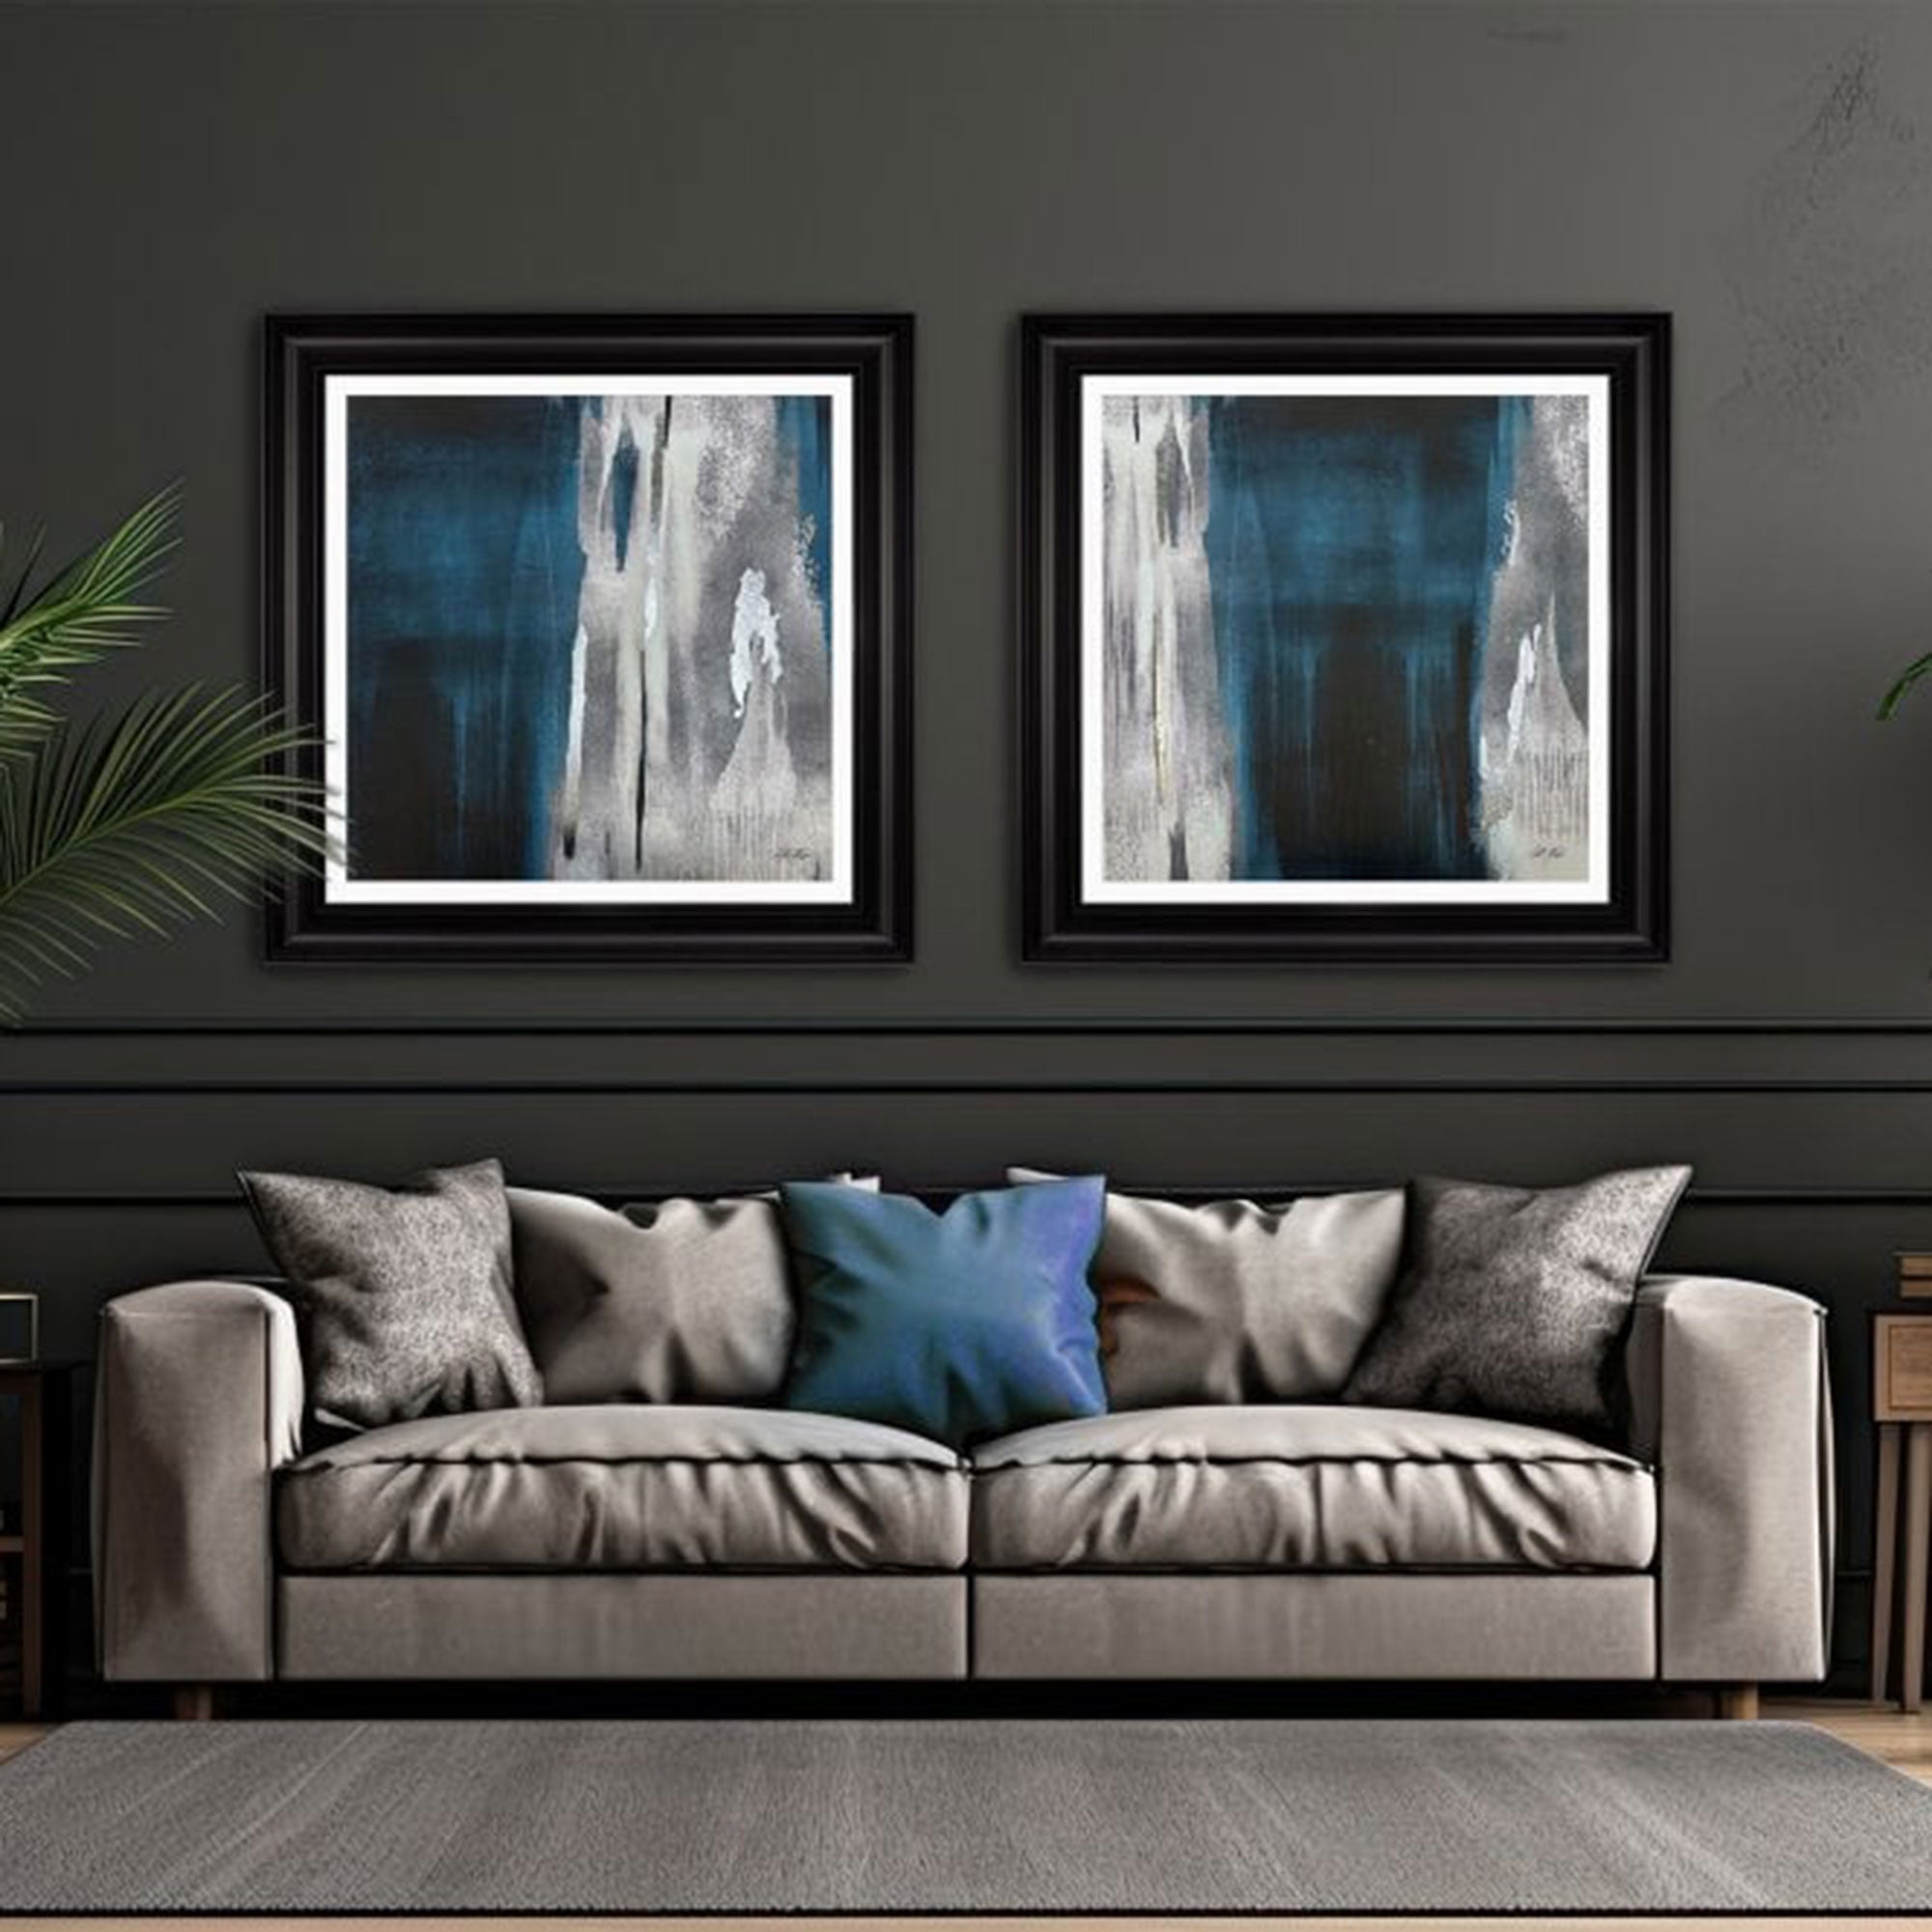 Artic 2 Teal Abstract - Framed Print